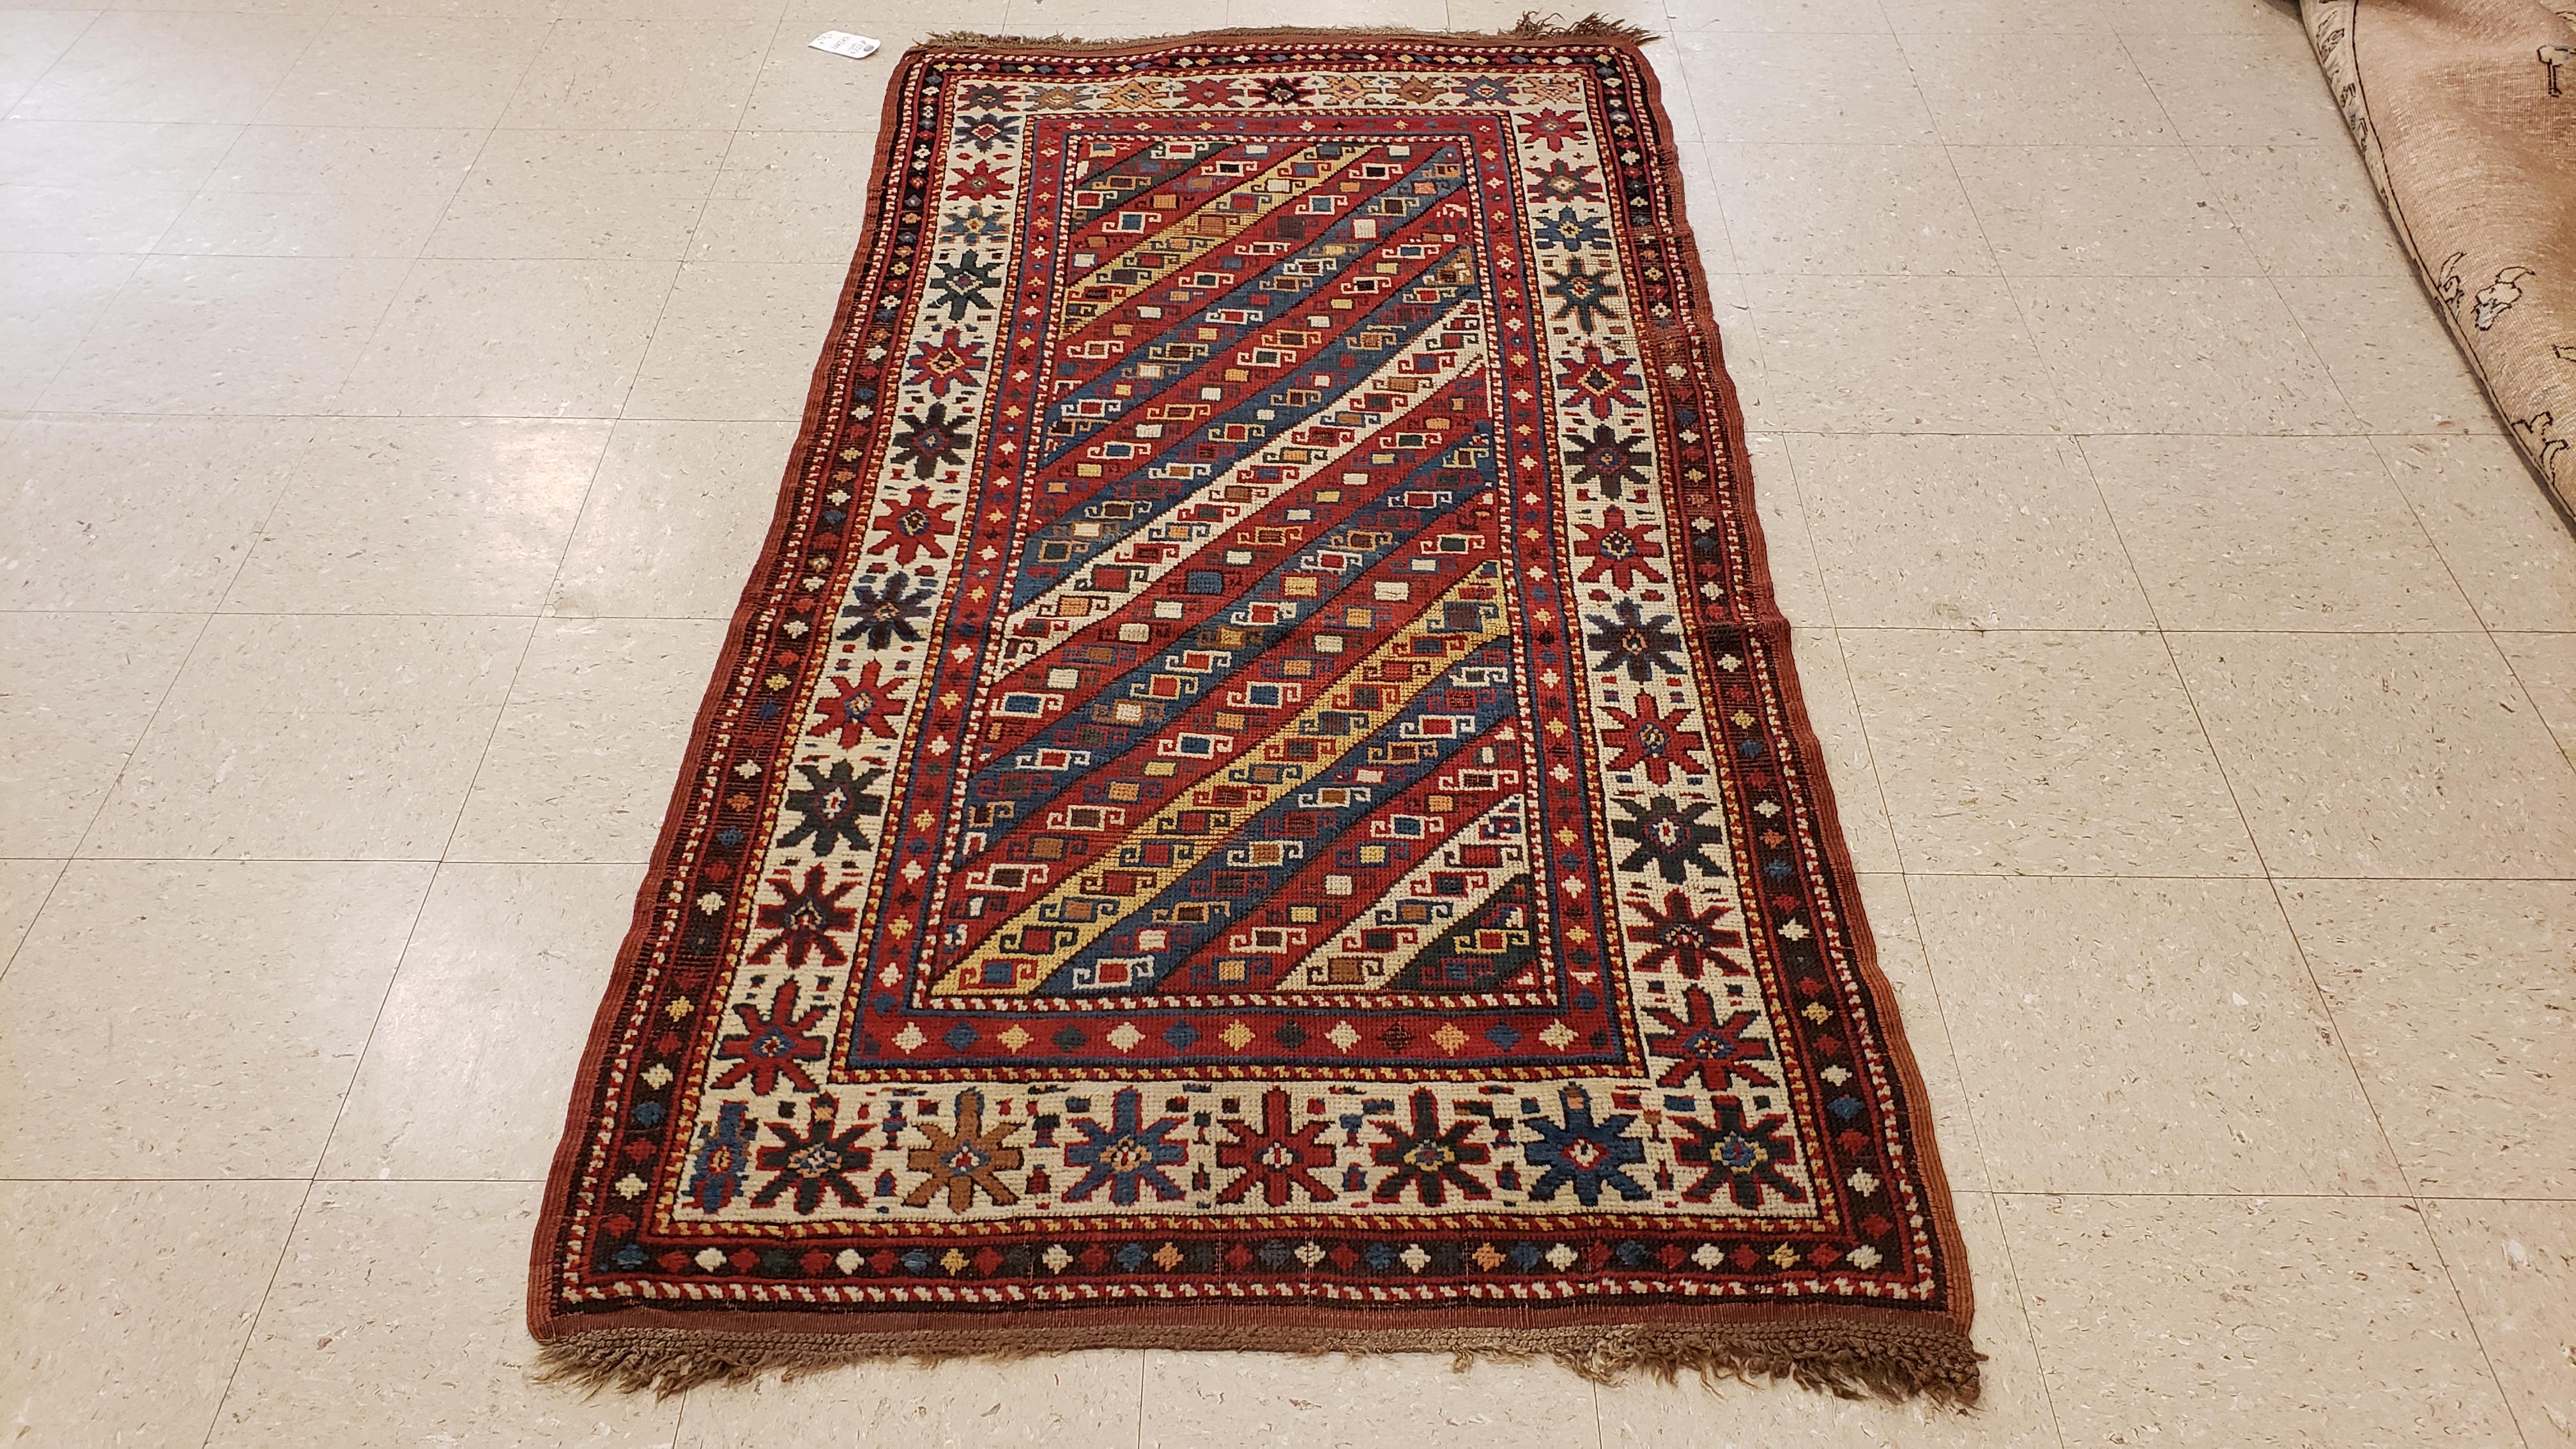 Antique Kazak Runner, Handmade Oriental Rug, Red, Blue, Yellow, Off-White, Green In Excellent Condition For Sale In Port Washington, NY